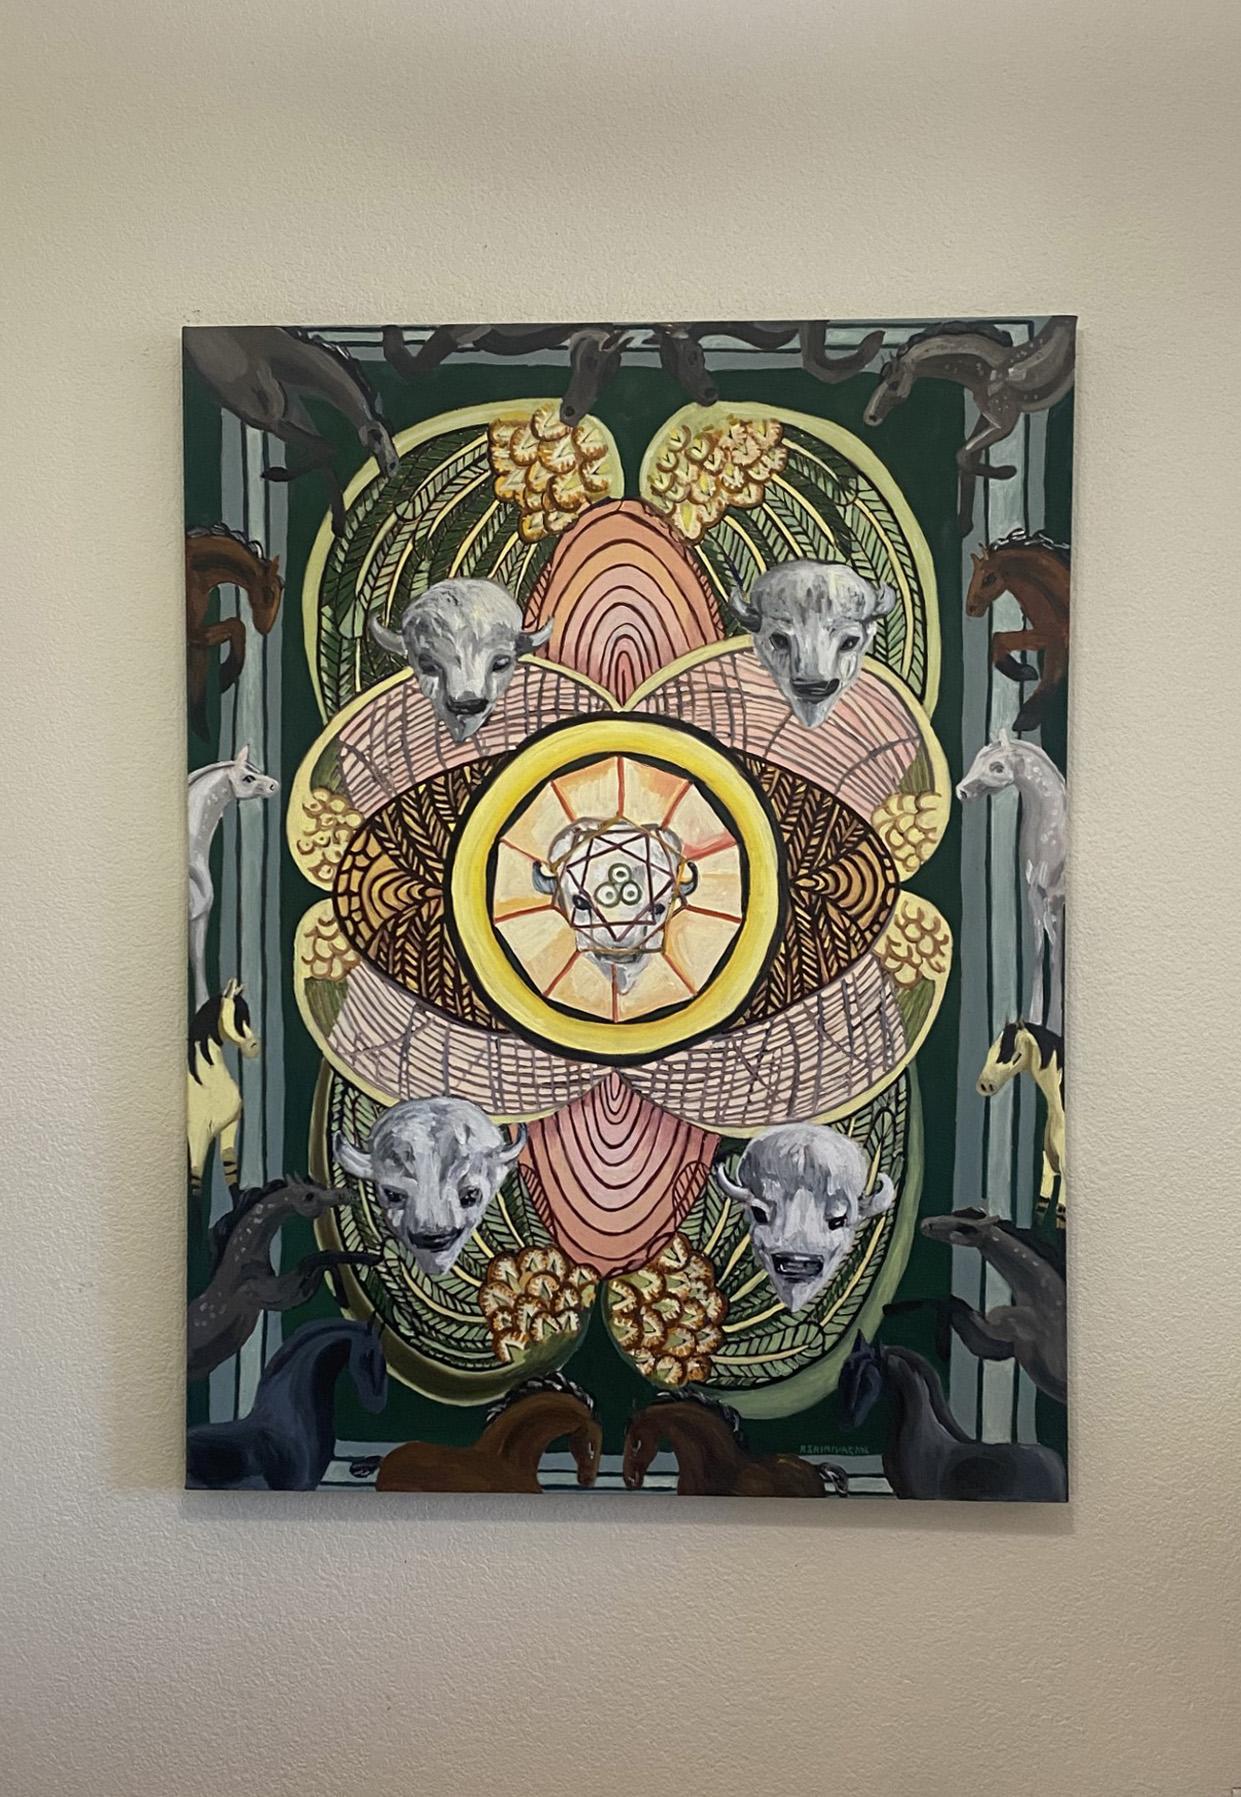 <p>Artist Comments<br />As a part of artist Rachel Srinivasan's Rodeo Series, the painting explores the symbolism of the five pentacles tarot card. The prominent green hues carry meanings of wealth, abundance, growth, and a connection to nature. The